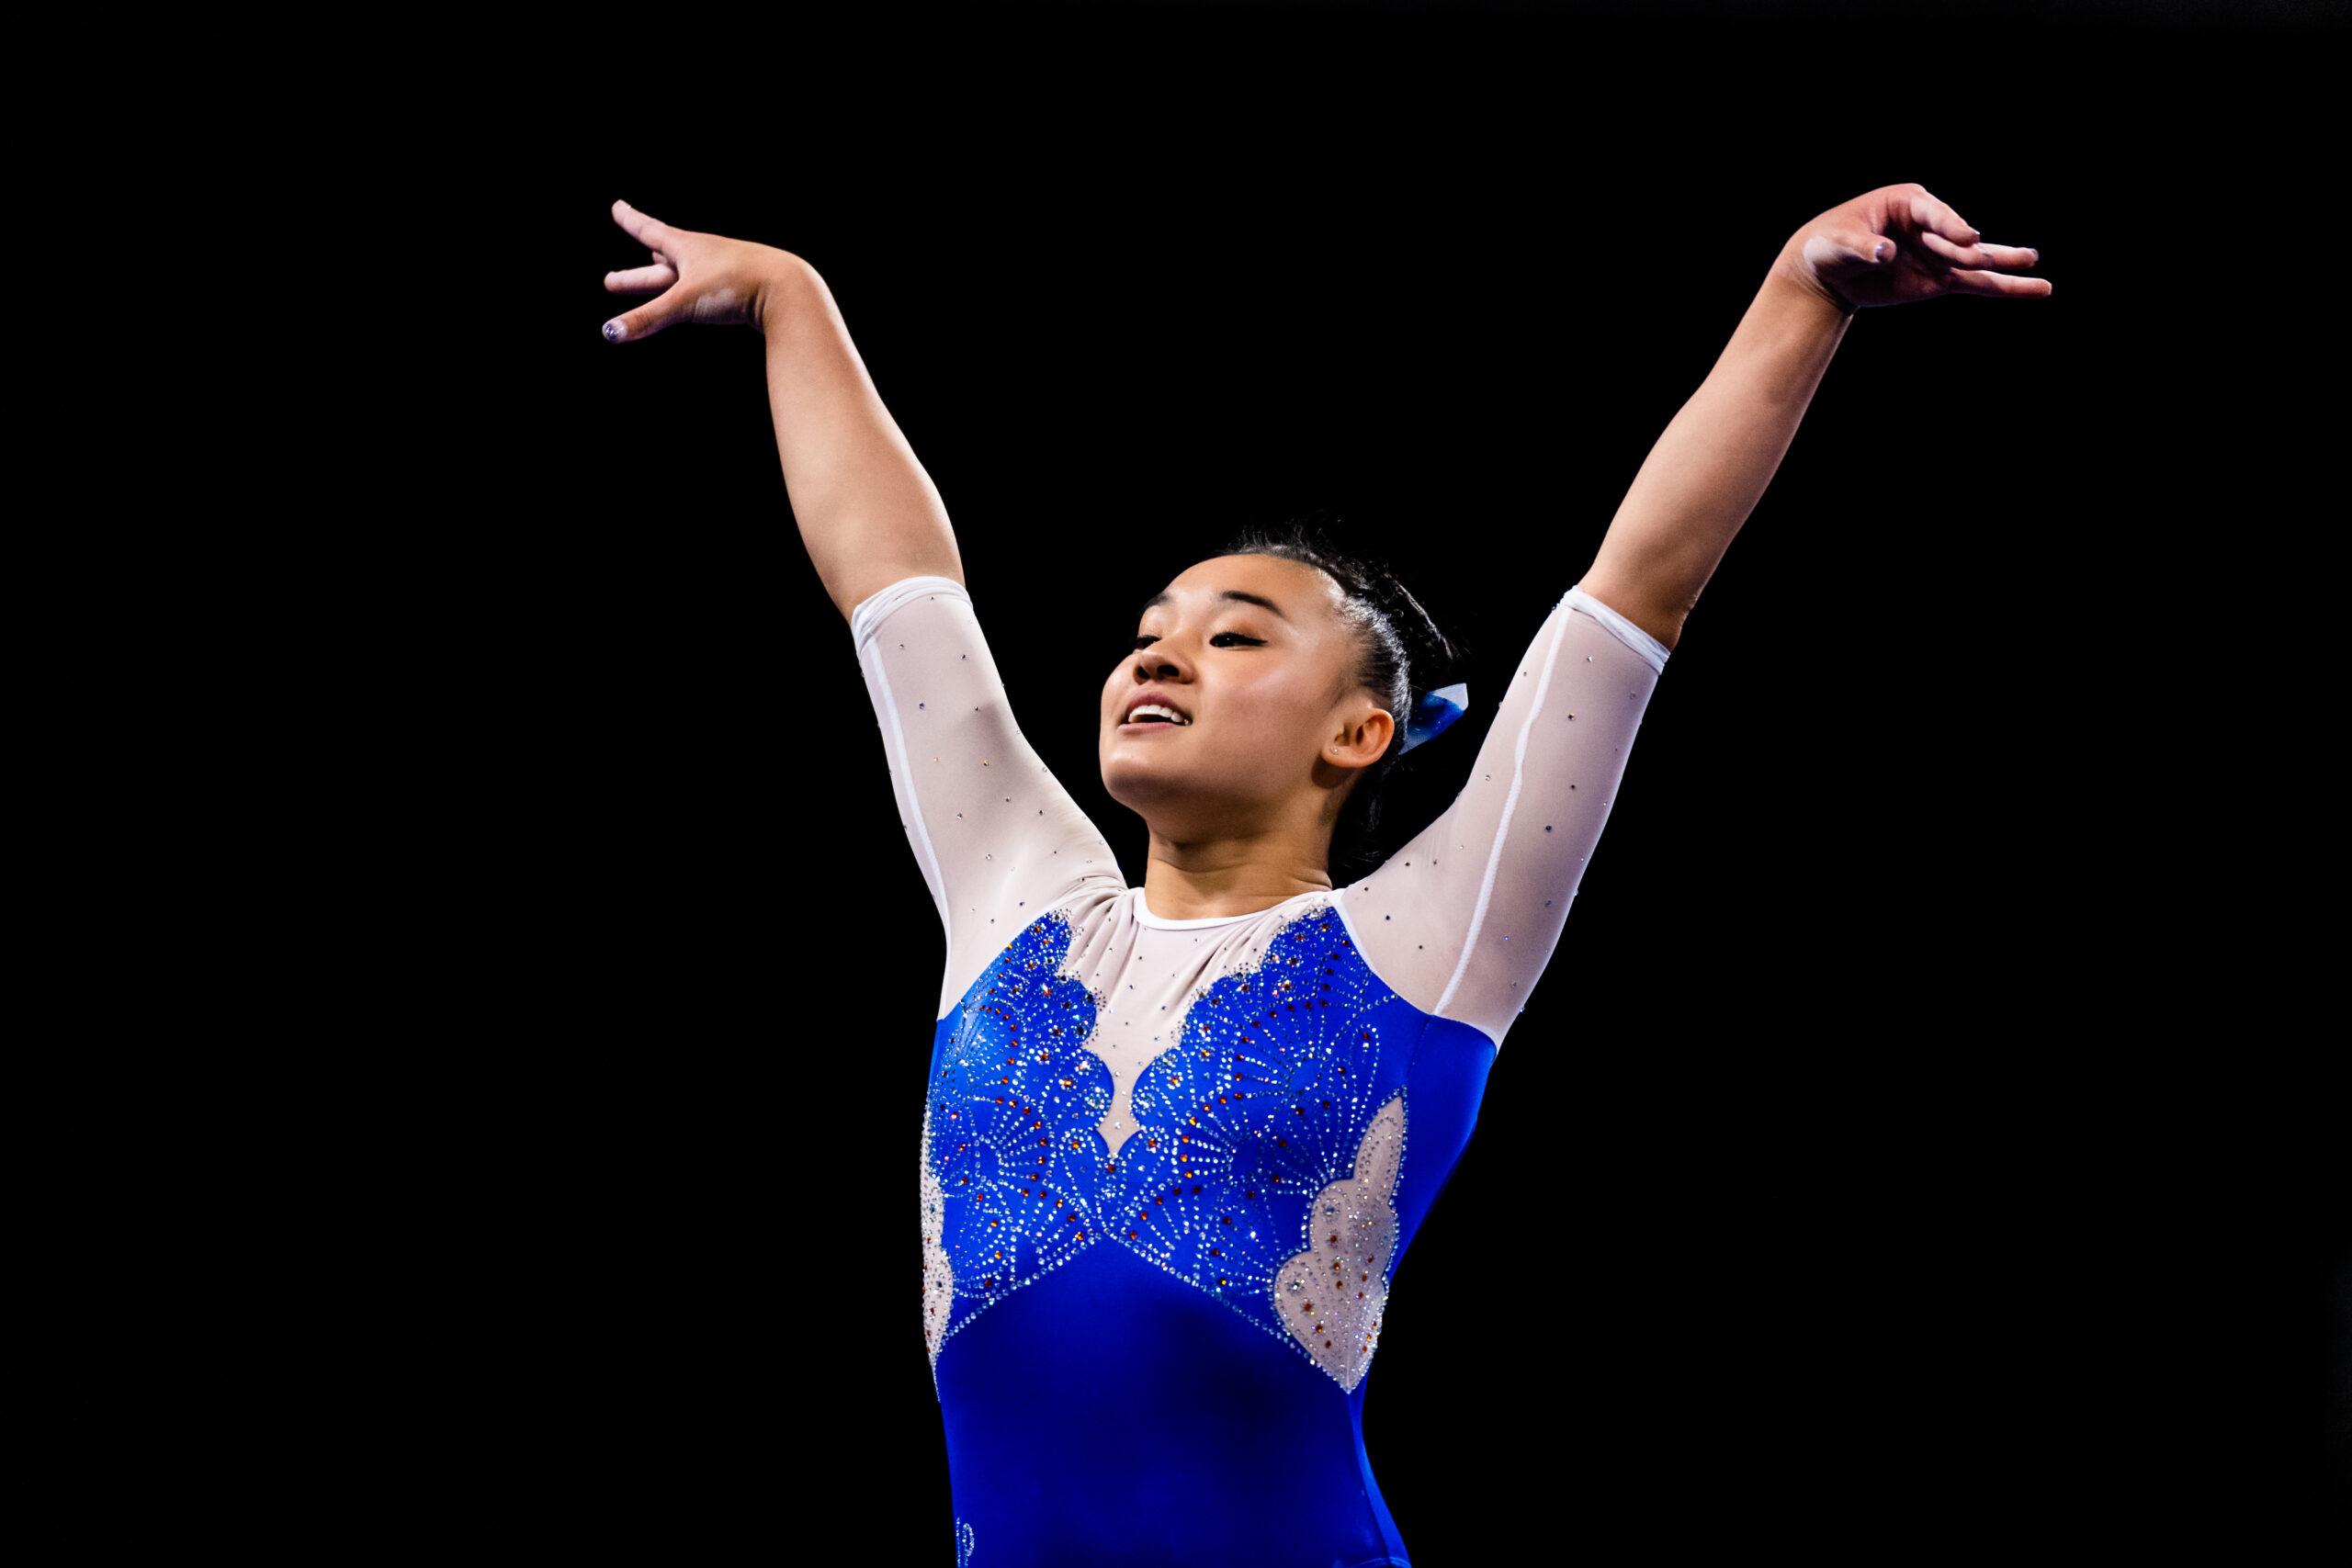 Florida's Leanne Wong on floor at the 2023 NCAA Women's Gymnastics Championships.